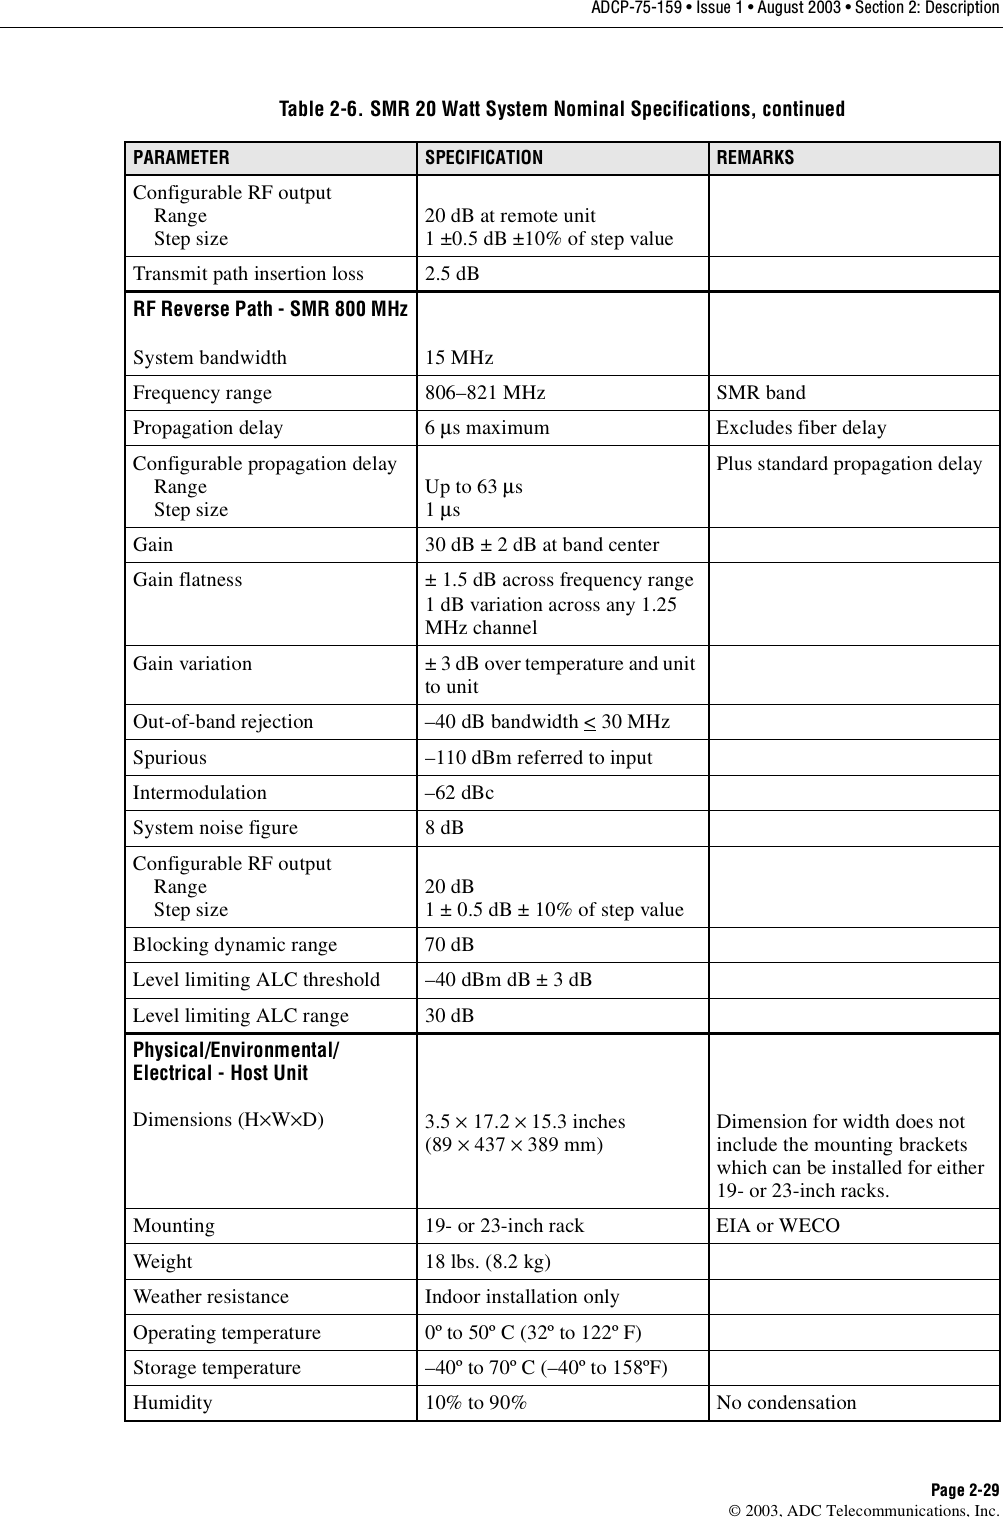 ADCP-75-159 • Issue 1 • August 2003 • Section 2: DescriptionPage 2-29© 2003, ADC Telecommunications, Inc.Configurable RF output    Range    Step size 20 dB at remote unit1 ±0.5 dB ±10% of step valueTransmit path insertion loss 2.5 dBRF Reverse Path - SMR 800 MHzSystem bandwidth 15 MHzFrequency range 806–821 MHz SMR bandPropagation delay 6 µs maximum Excludes fiber delayConfigurable propagation delay    Range    Step size Up to 63 µs1 µsPlus standard propagation delayGain 30 dB ± 2 dB at band center Gain flatness ± 1.5 dB across frequency range1 dB variation across any 1.25 MHz channelGain variation ± 3 dB over temperature and unit to unitOut-of-band rejection –40 dB bandwidth &lt; 30 MHzSpurious –110 dBm referred to inputIntermodulation –62 dBcSystem noise figure 8 dBConfigurable RF output    Range    Step size 20 dB1 ± 0.5 dB ± 10% of step valueBlocking dynamic range 70 dBLevel limiting ALC threshold –40 dBm dB ± 3 dBLevel limiting ALC range 30 dBPhysical/Environmental/Electrical - Host UnitDimensions (H×W×D) 3.5 × 17.2 × 15.3 inches(89 × 437 × 389 mm) Dimension for width does not include the mounting brackets which can be installed for either 19- or 23-inch racks. Mounting 19- or 23-inch rack EIA or WECOWeight 18 lbs. (8.2 kg)Weather resistance Indoor installation onlyOperating temperature 0º to 50º C (32º to 122º F)Storage temperature –40º to 70º C (–40º to 158ºF)Humidity 10% to 90% No condensationTable 2-6. SMR 20 Watt System Nominal Specifications, continuedPARAMETER SPECIFICATION REMARKS